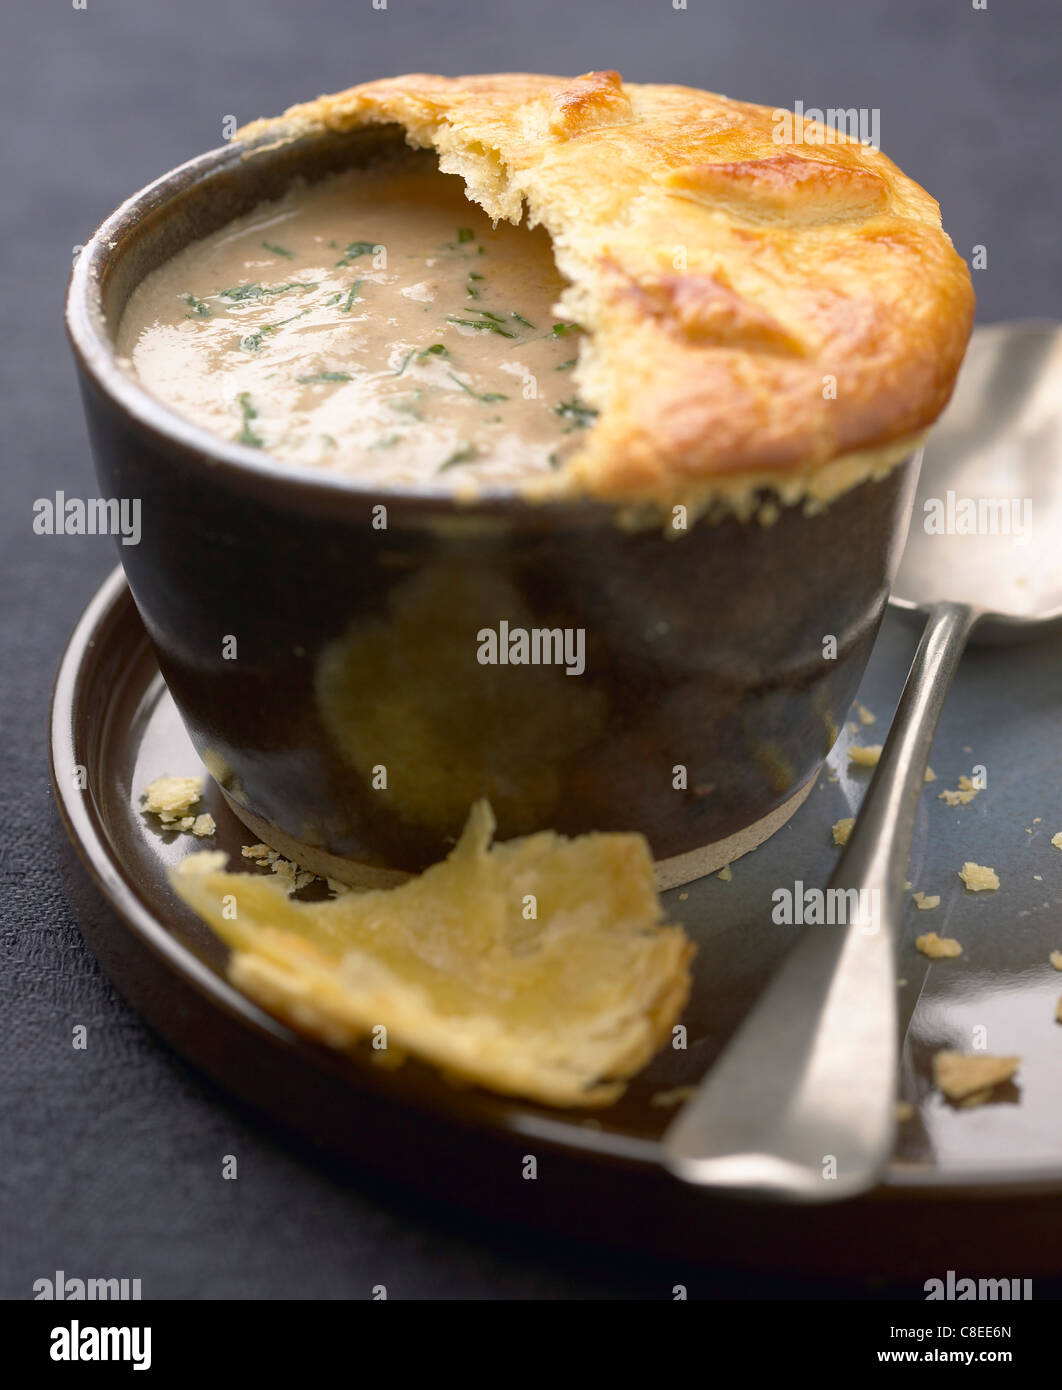 Cream of mushroom soup sealed with flaky pastry Stock Photo